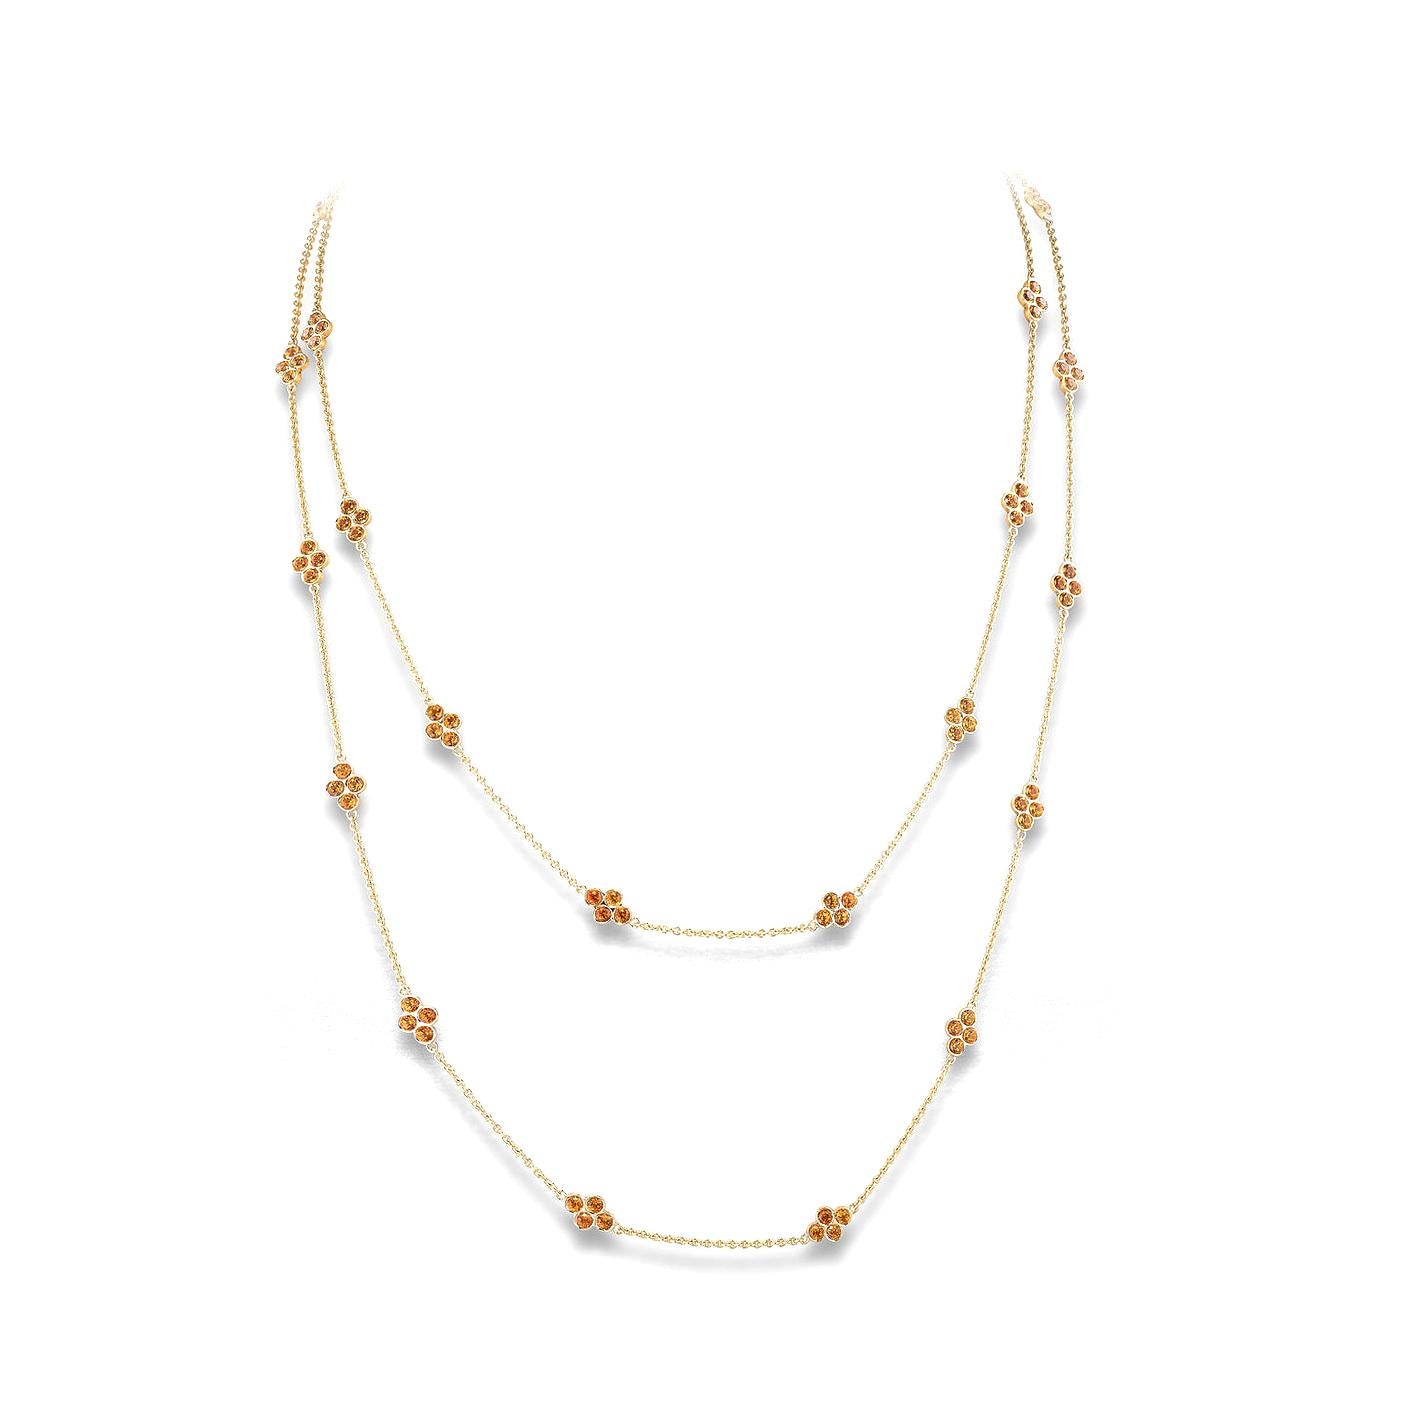 Necklace in 18kt yellow gold set with 108 citrines 8.61 cts ( 125 cm)